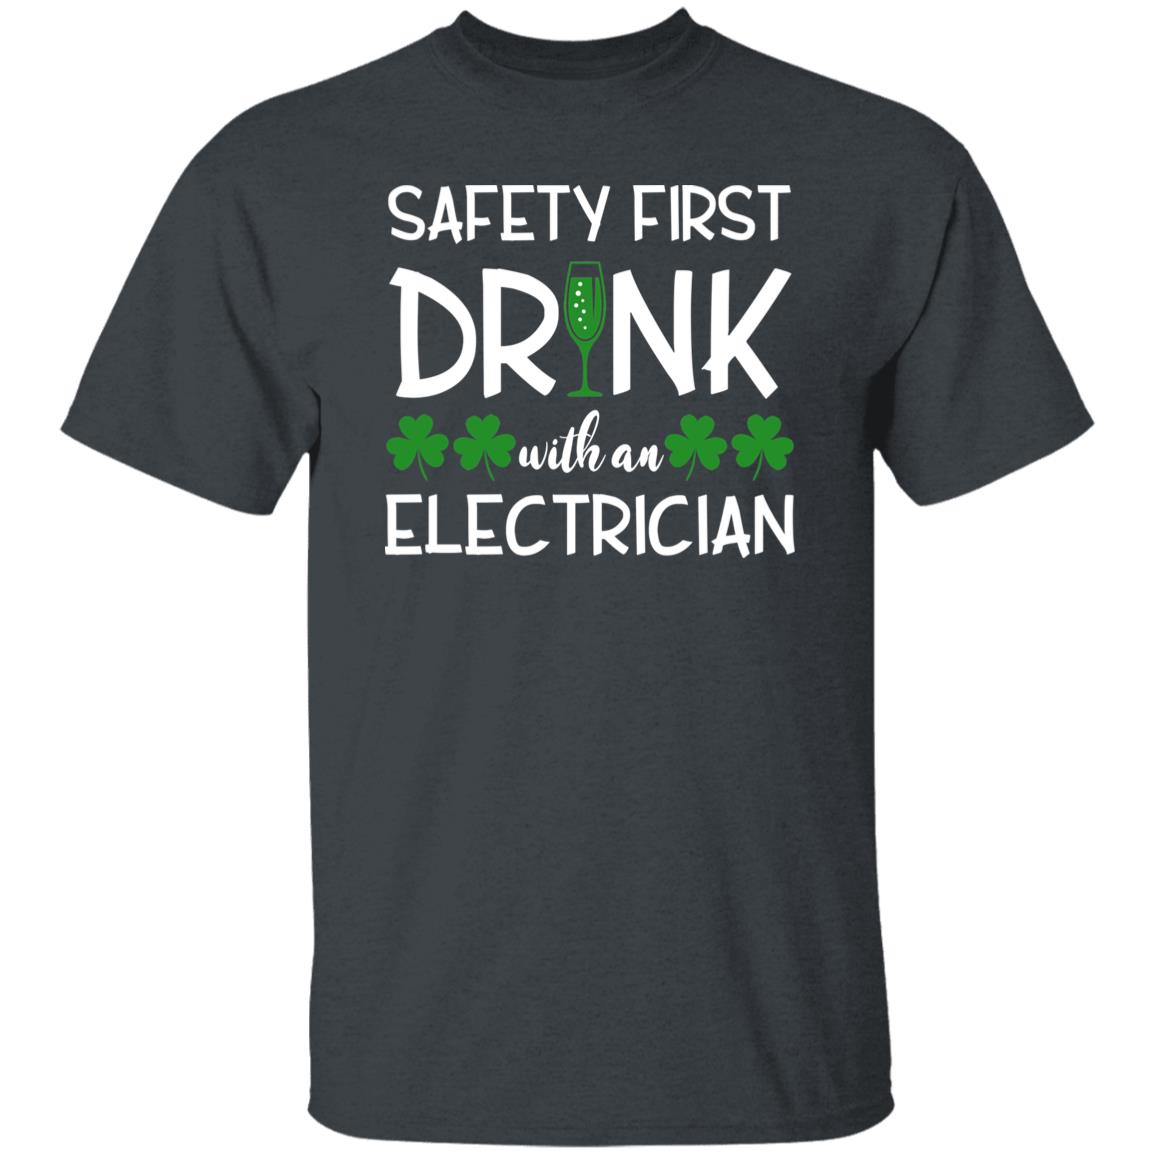 Safety first drink with an electrician St Patrick Day Unisex t-shirt 4XL 5XL 6XL-Dark Heather-Family-Gift-Planet